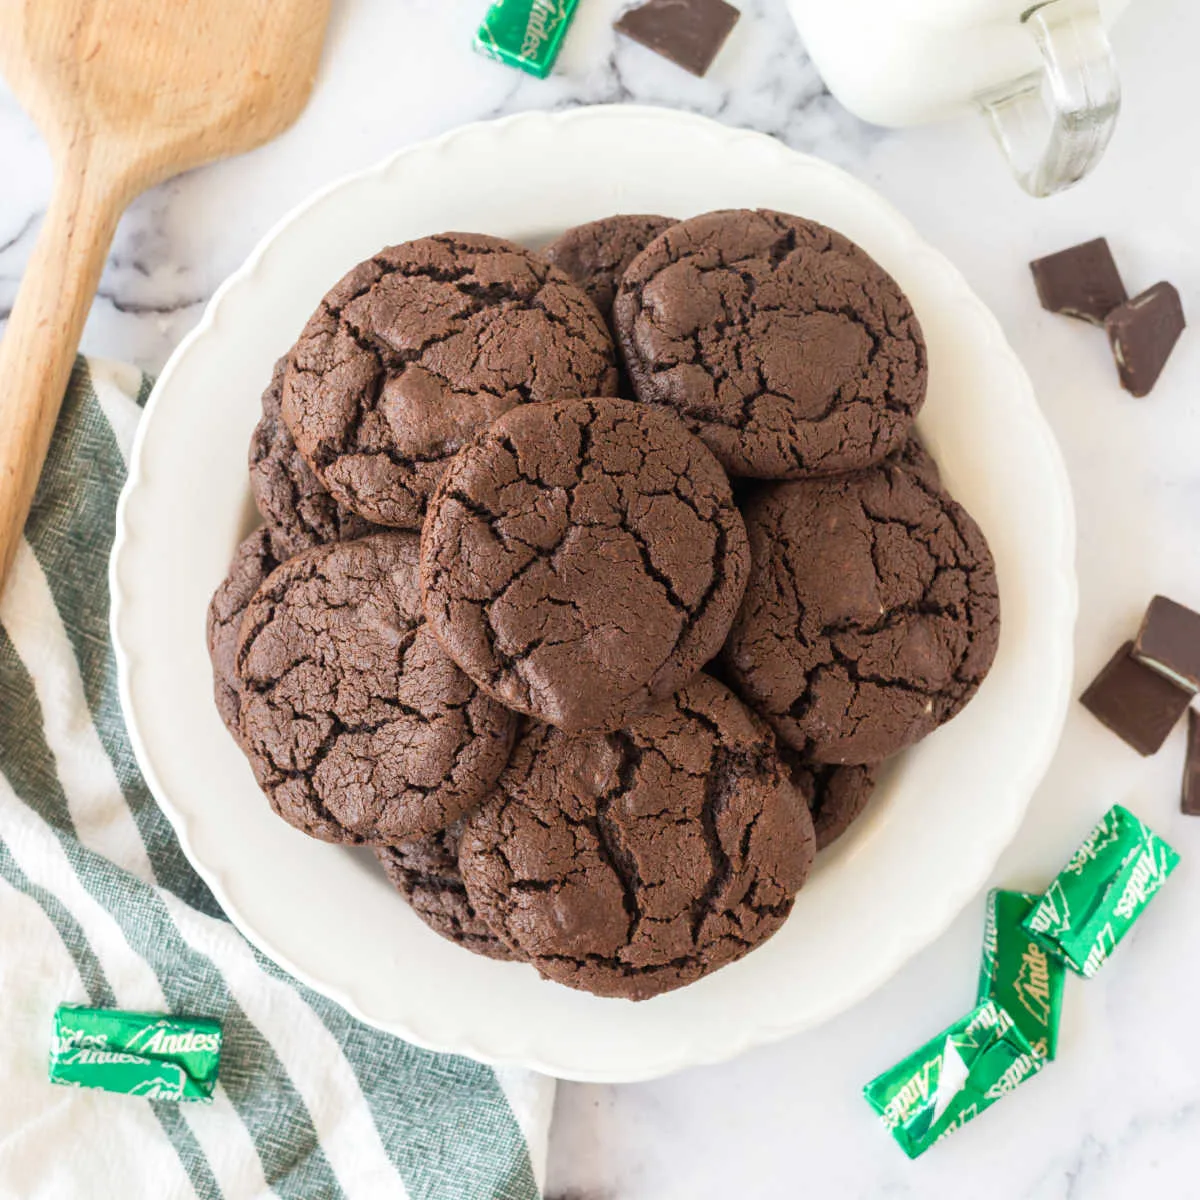 White plate piled high with chocolate mint cookies showing crackly exterior surrounded by Andes mints candies.